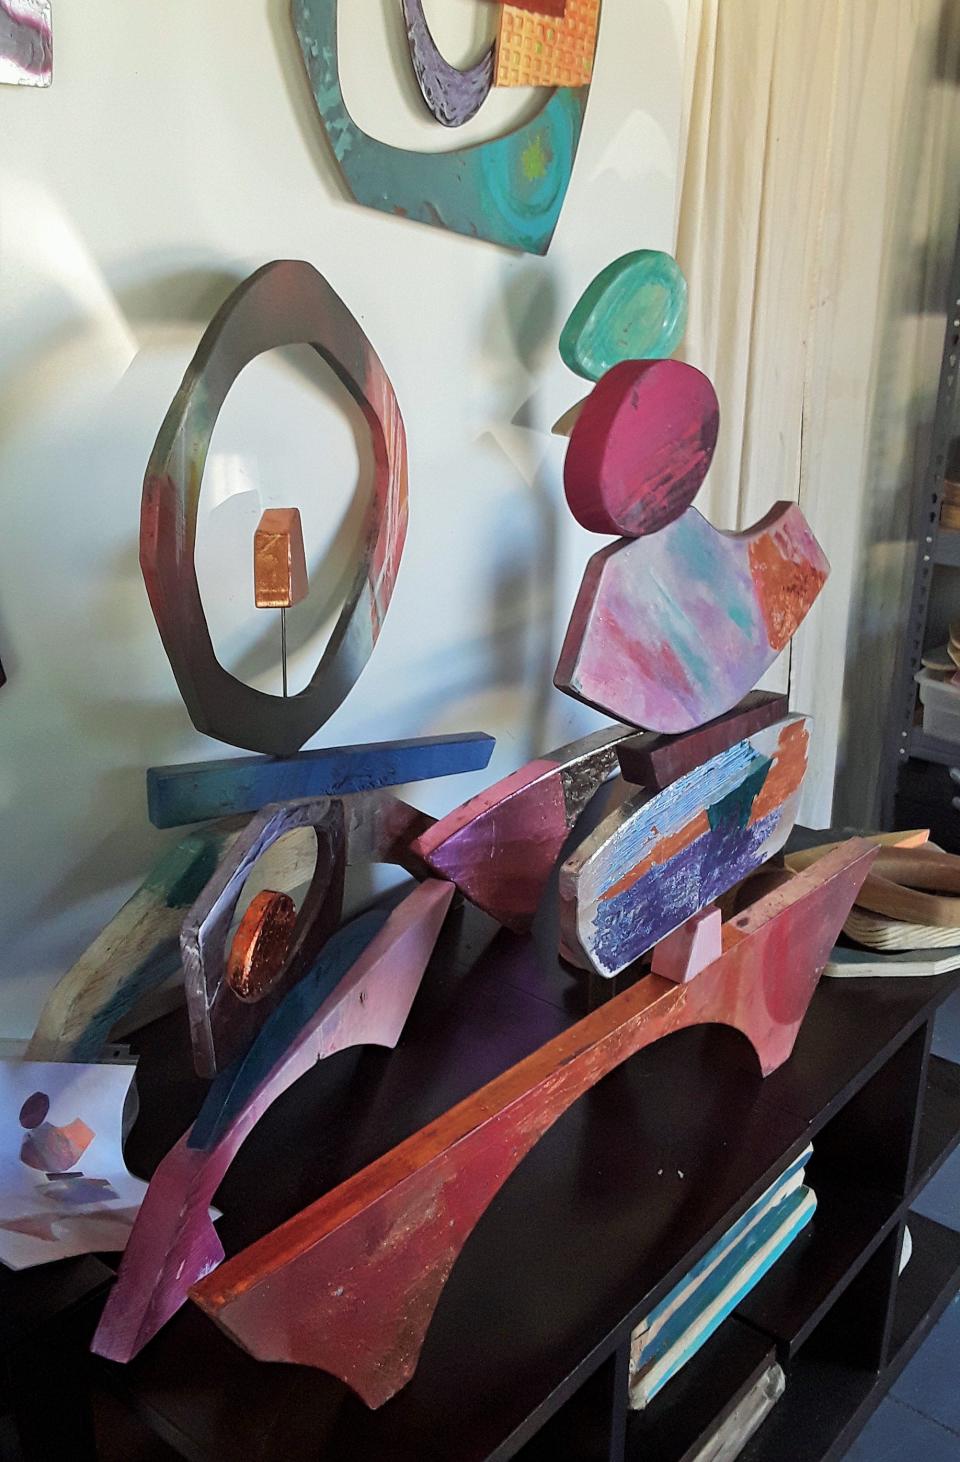 More interactive artwork from Kimberlee Rocca can be found in her studio, such as these wooden “play sculpture” pieces that allow the viewer to design their own sculpture.